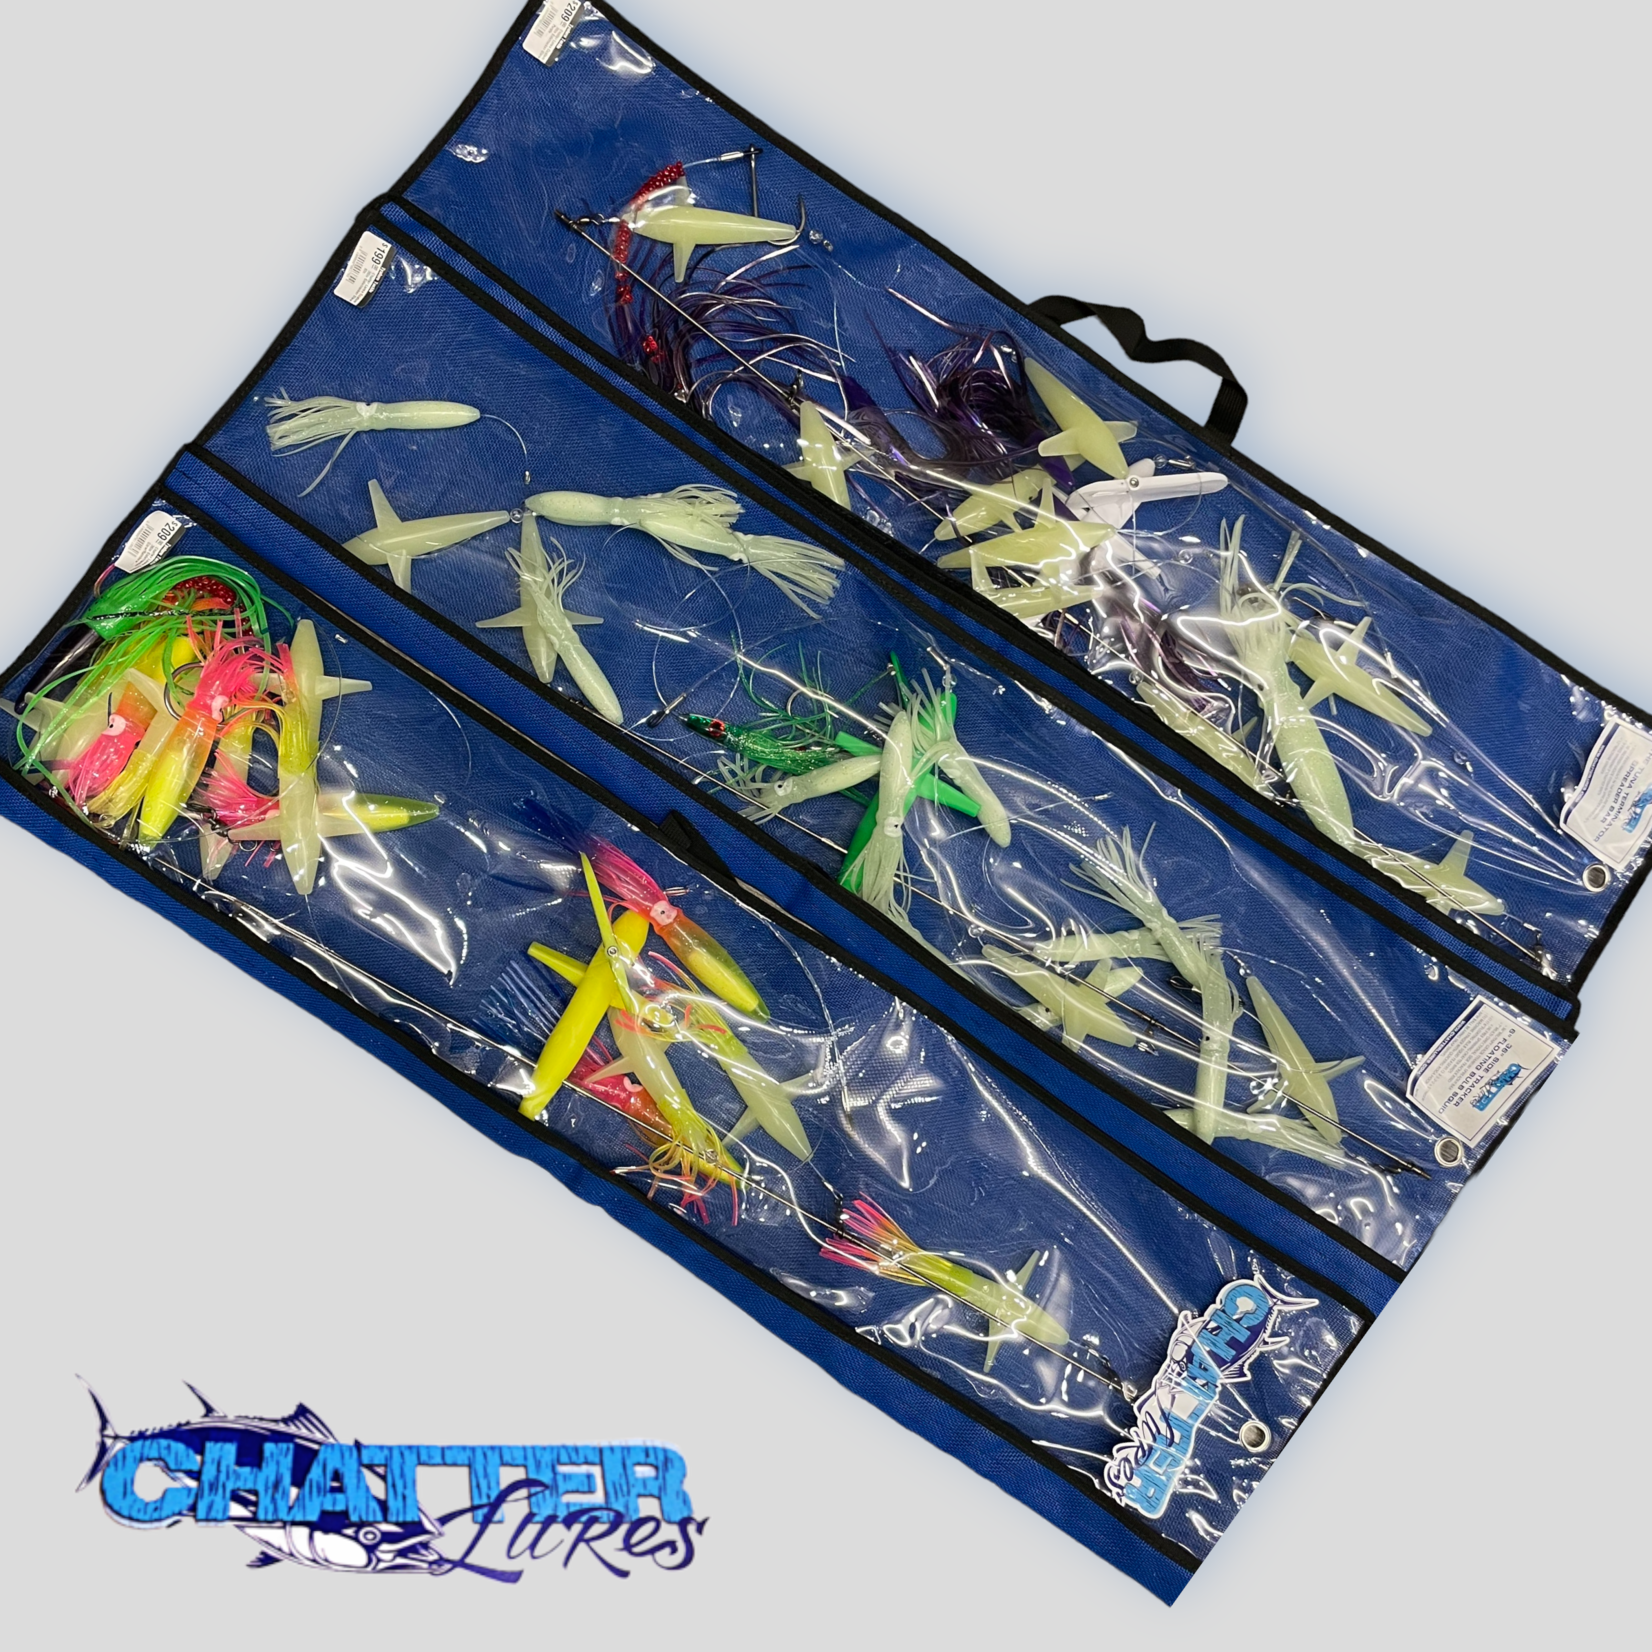 Chatter Lures Chatter Lures Custom 36in Sidetracker